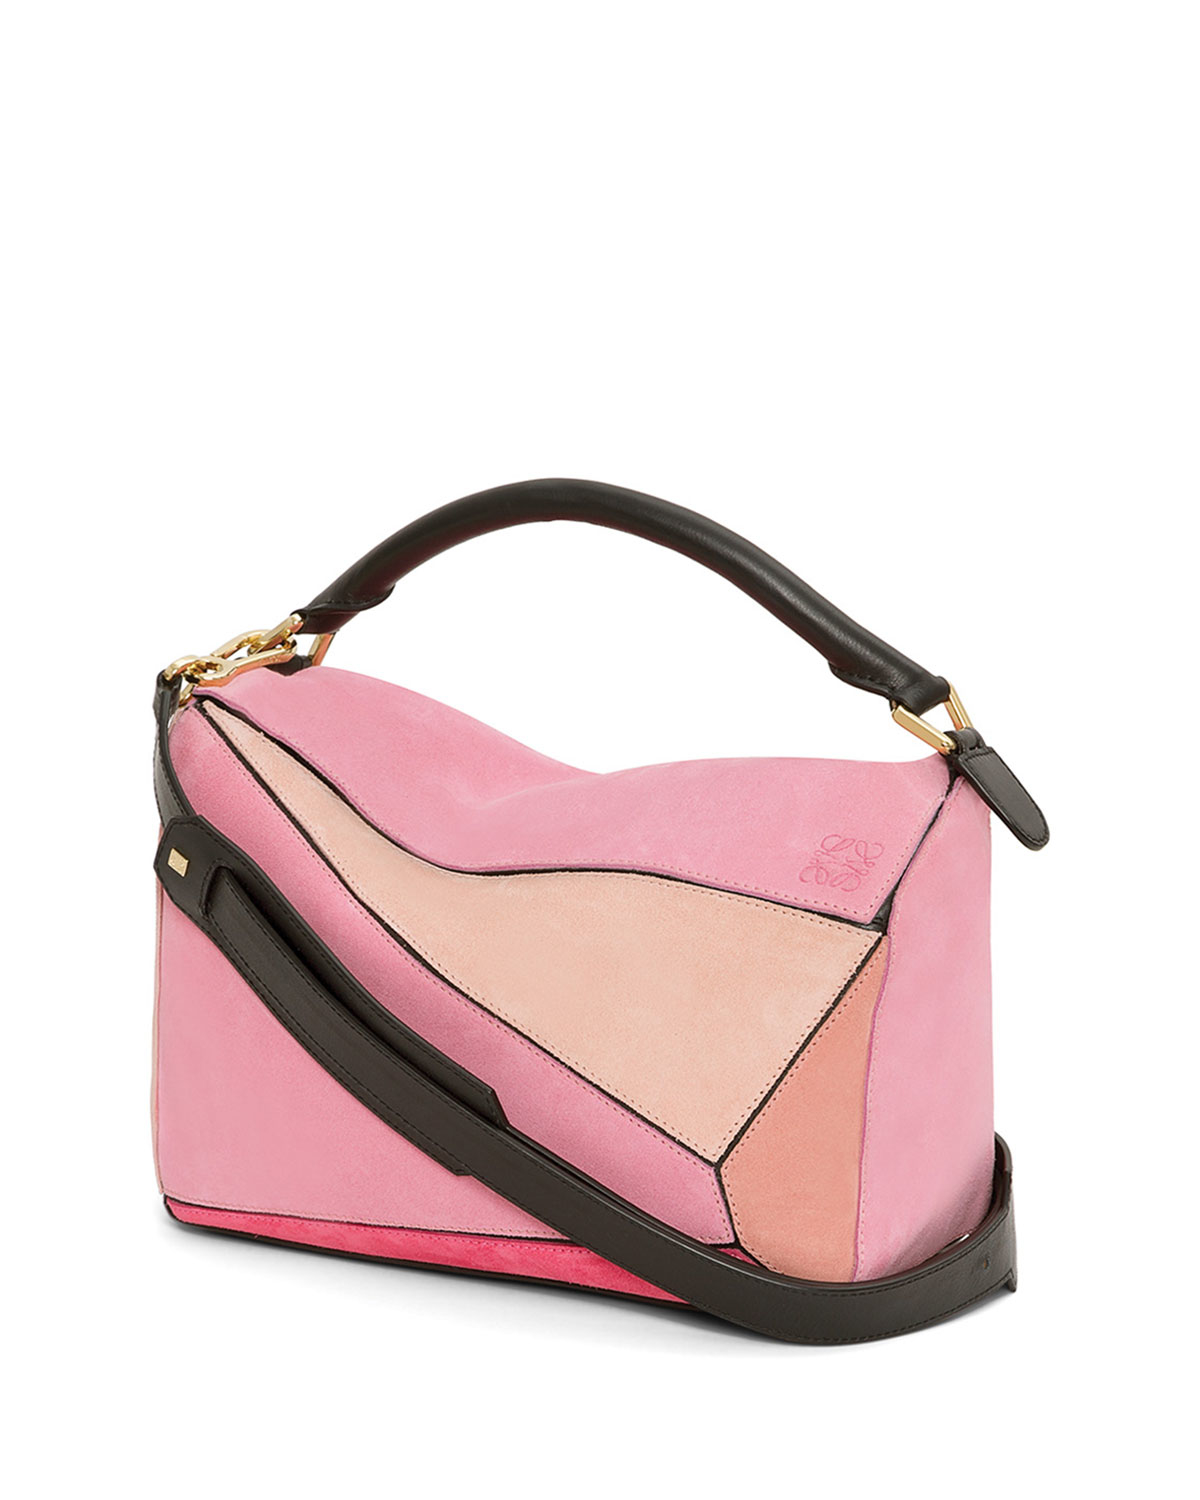 Lyst - Loewe Puzzle Leather and Suede Small Bag in Pink